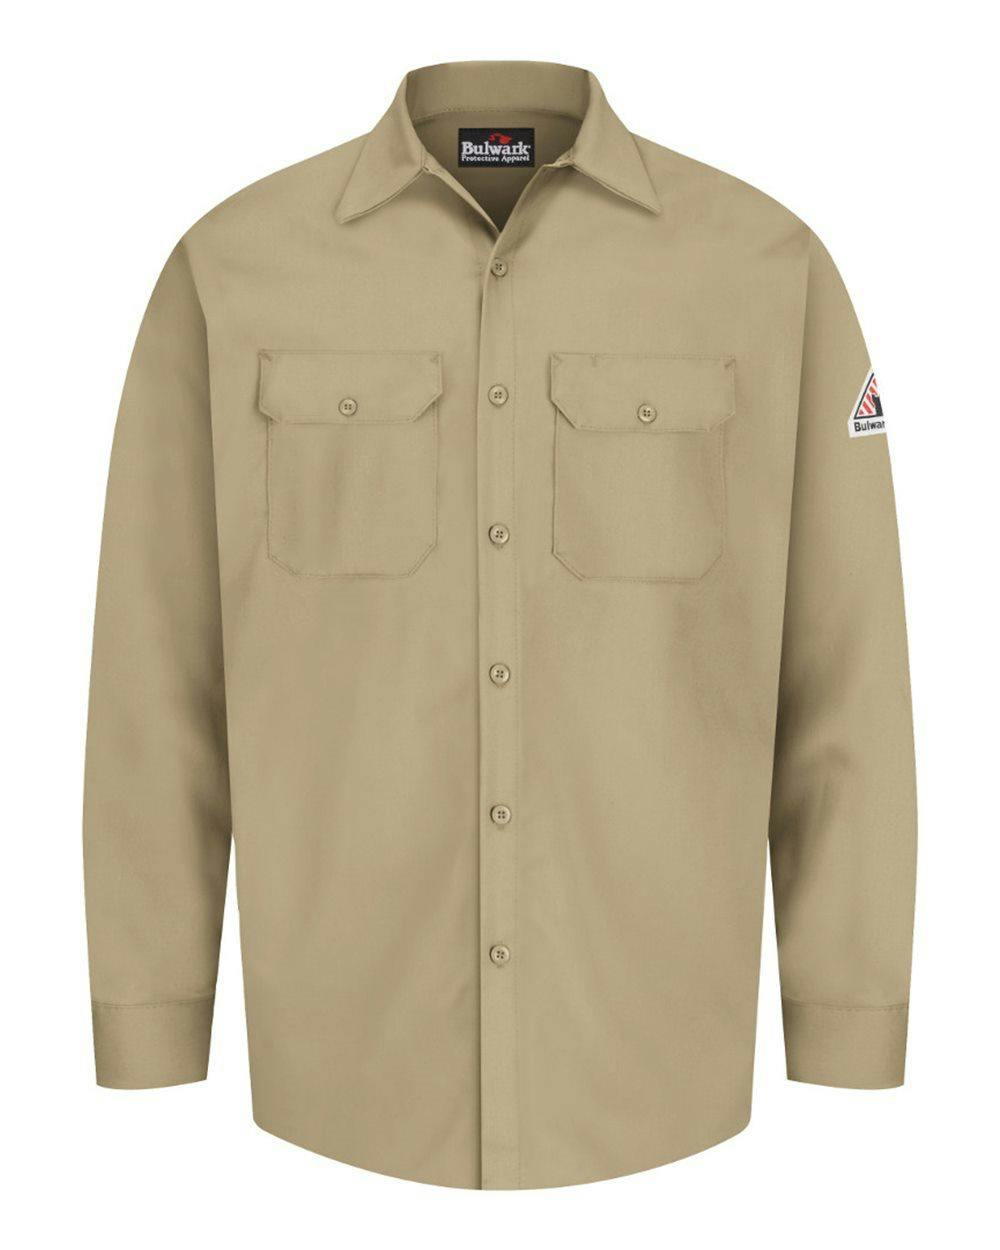 Image for Flame Resistant Excel Work Shirt - Tall Sizes - SEW2T